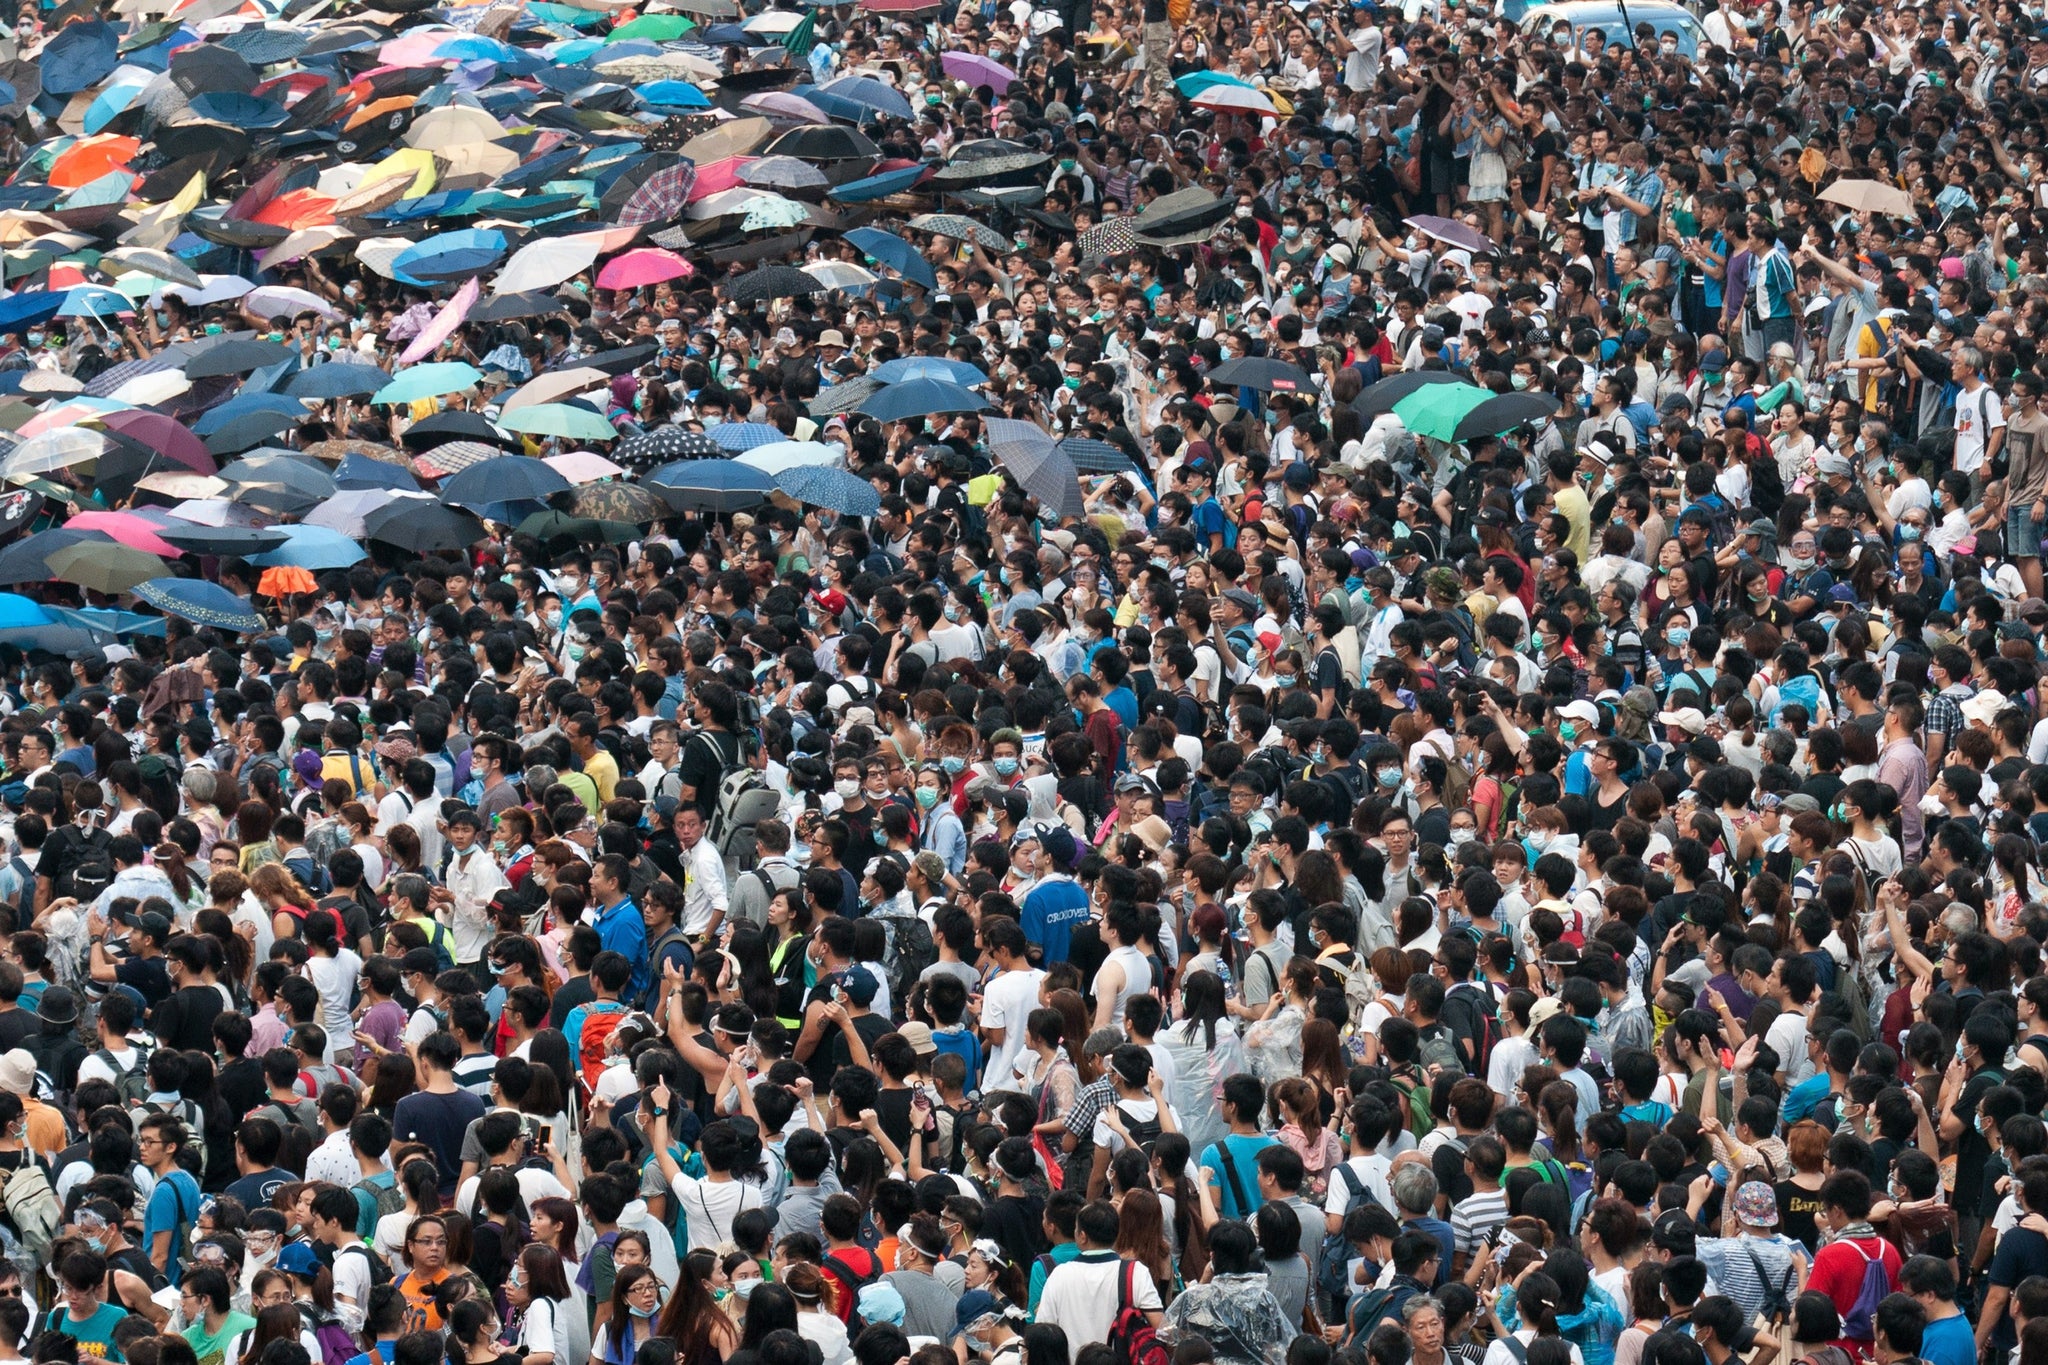 Thousands of demonstrators storm onto a highway after breaking through police cordons during ongoing pro-democracy protests in Hong Kong on 28 September 2014